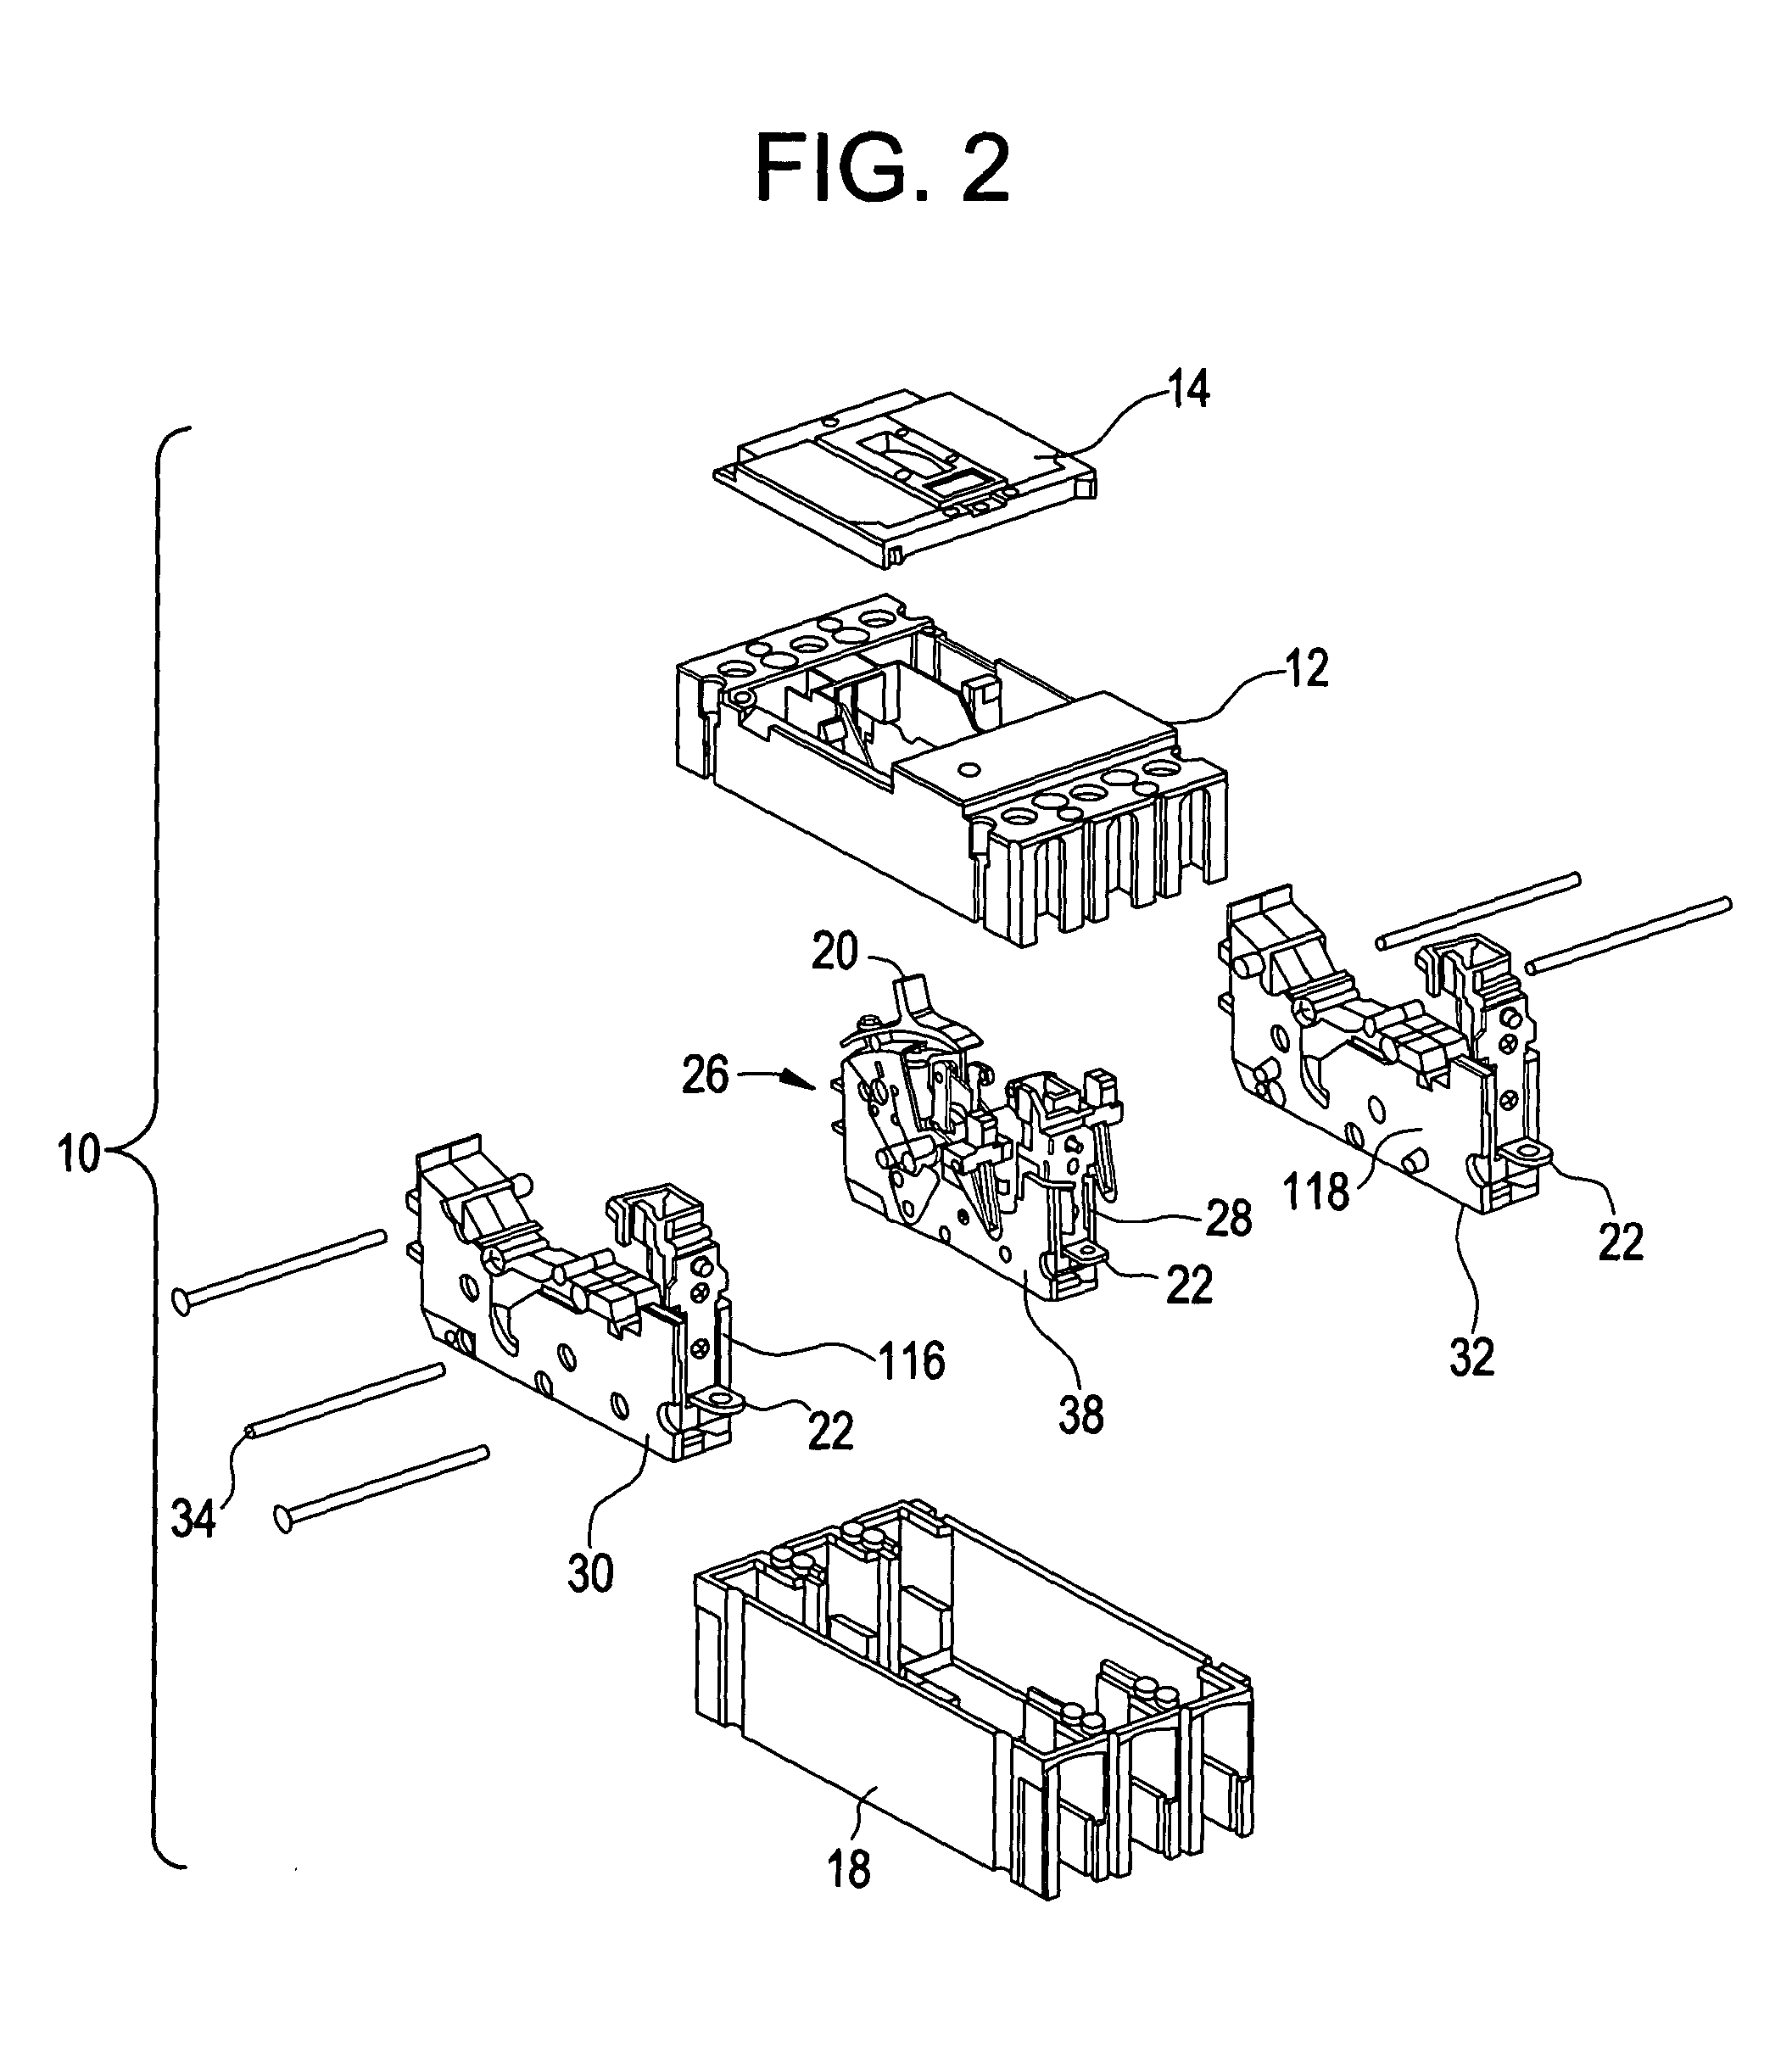 Isolation cap and bushing for circuit breaker rotor assembly